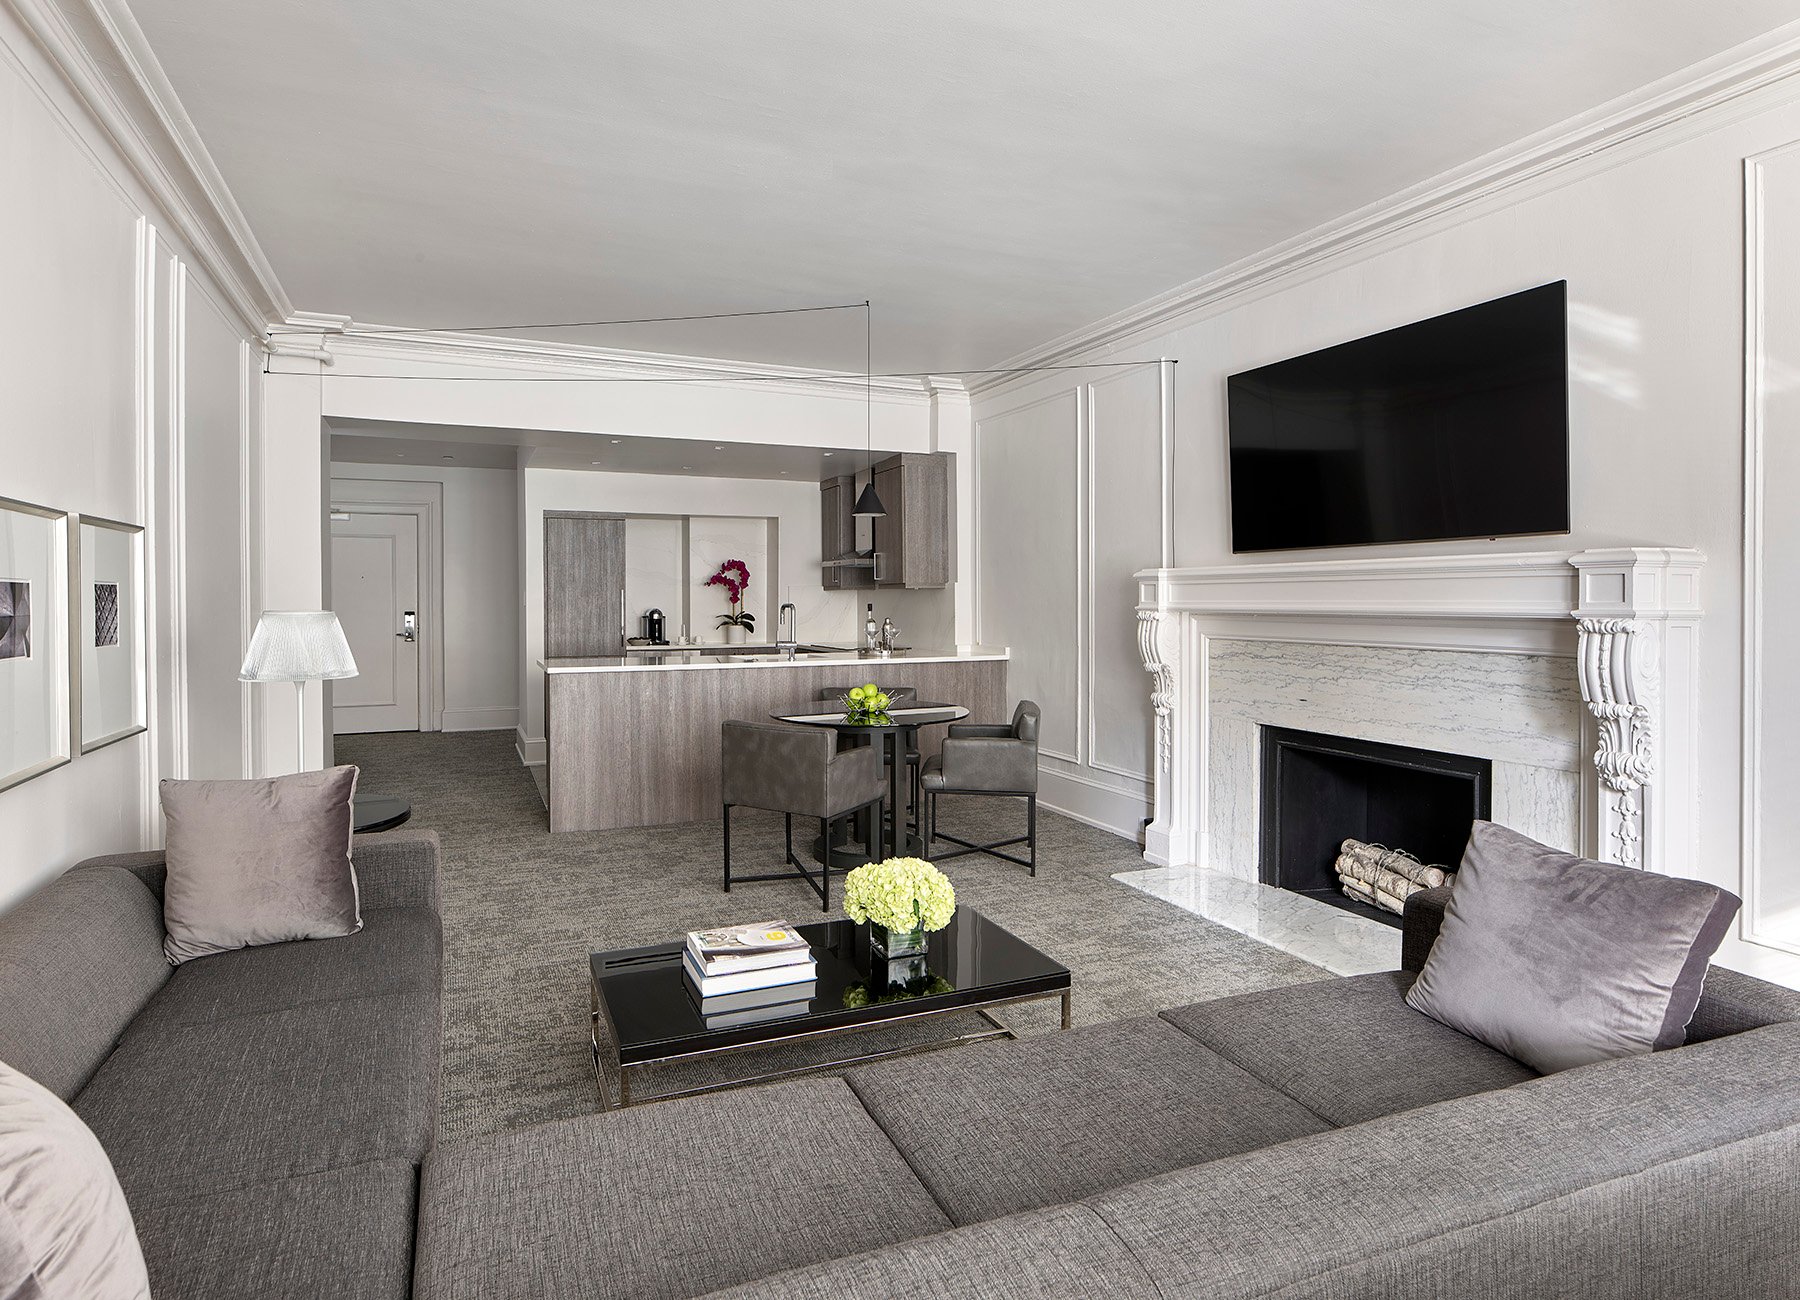 Suite with fireplace, living room with gray furniture, and open kitchen